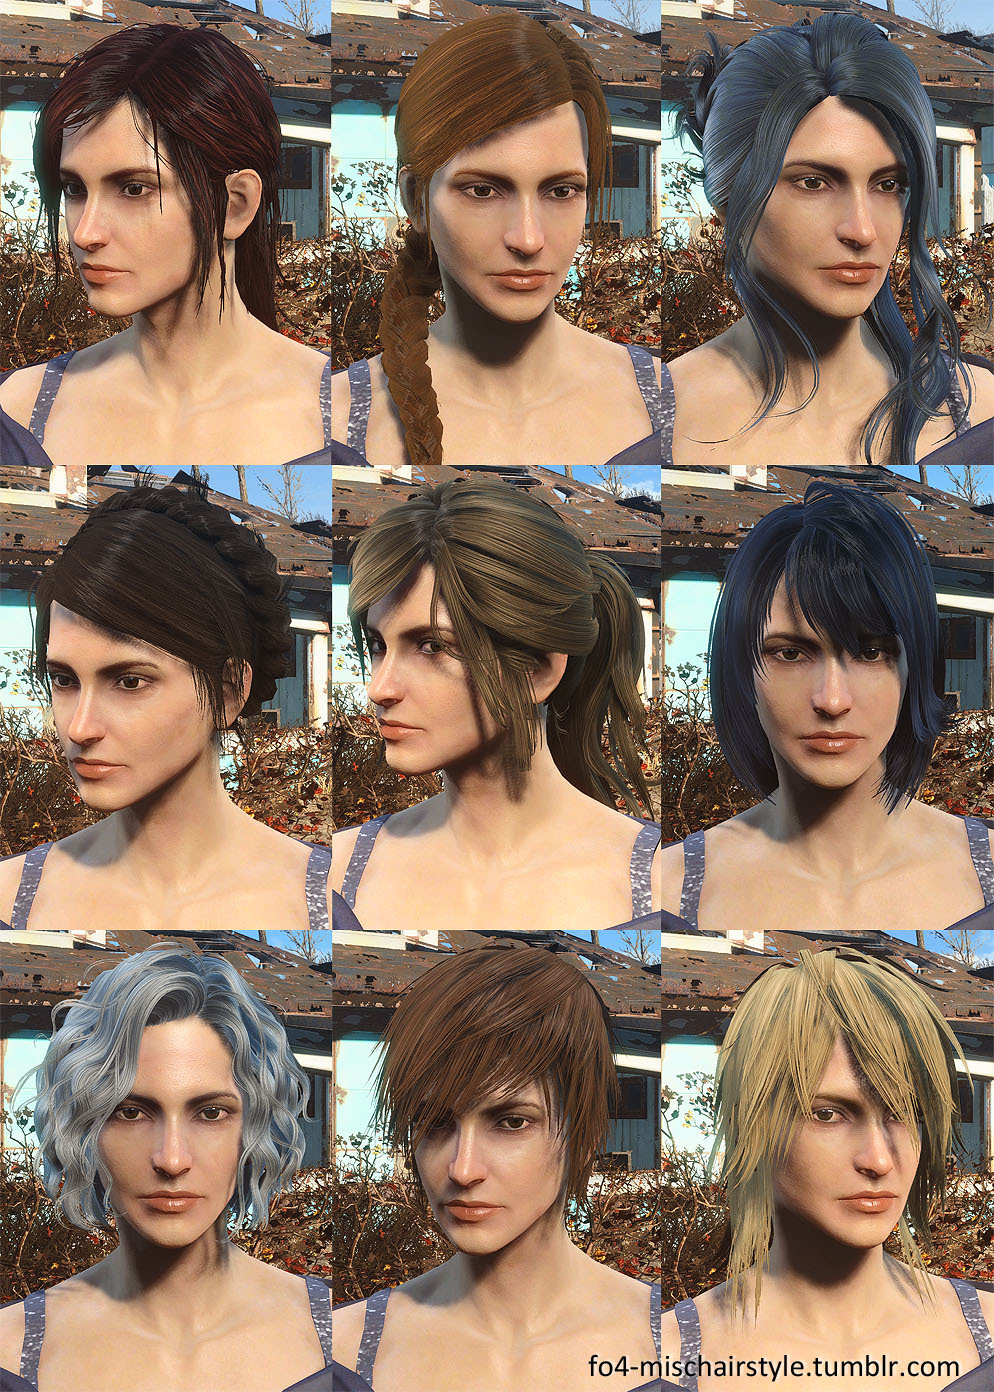 Fallout 4 Misc Hairstyle - which haircut suits my face